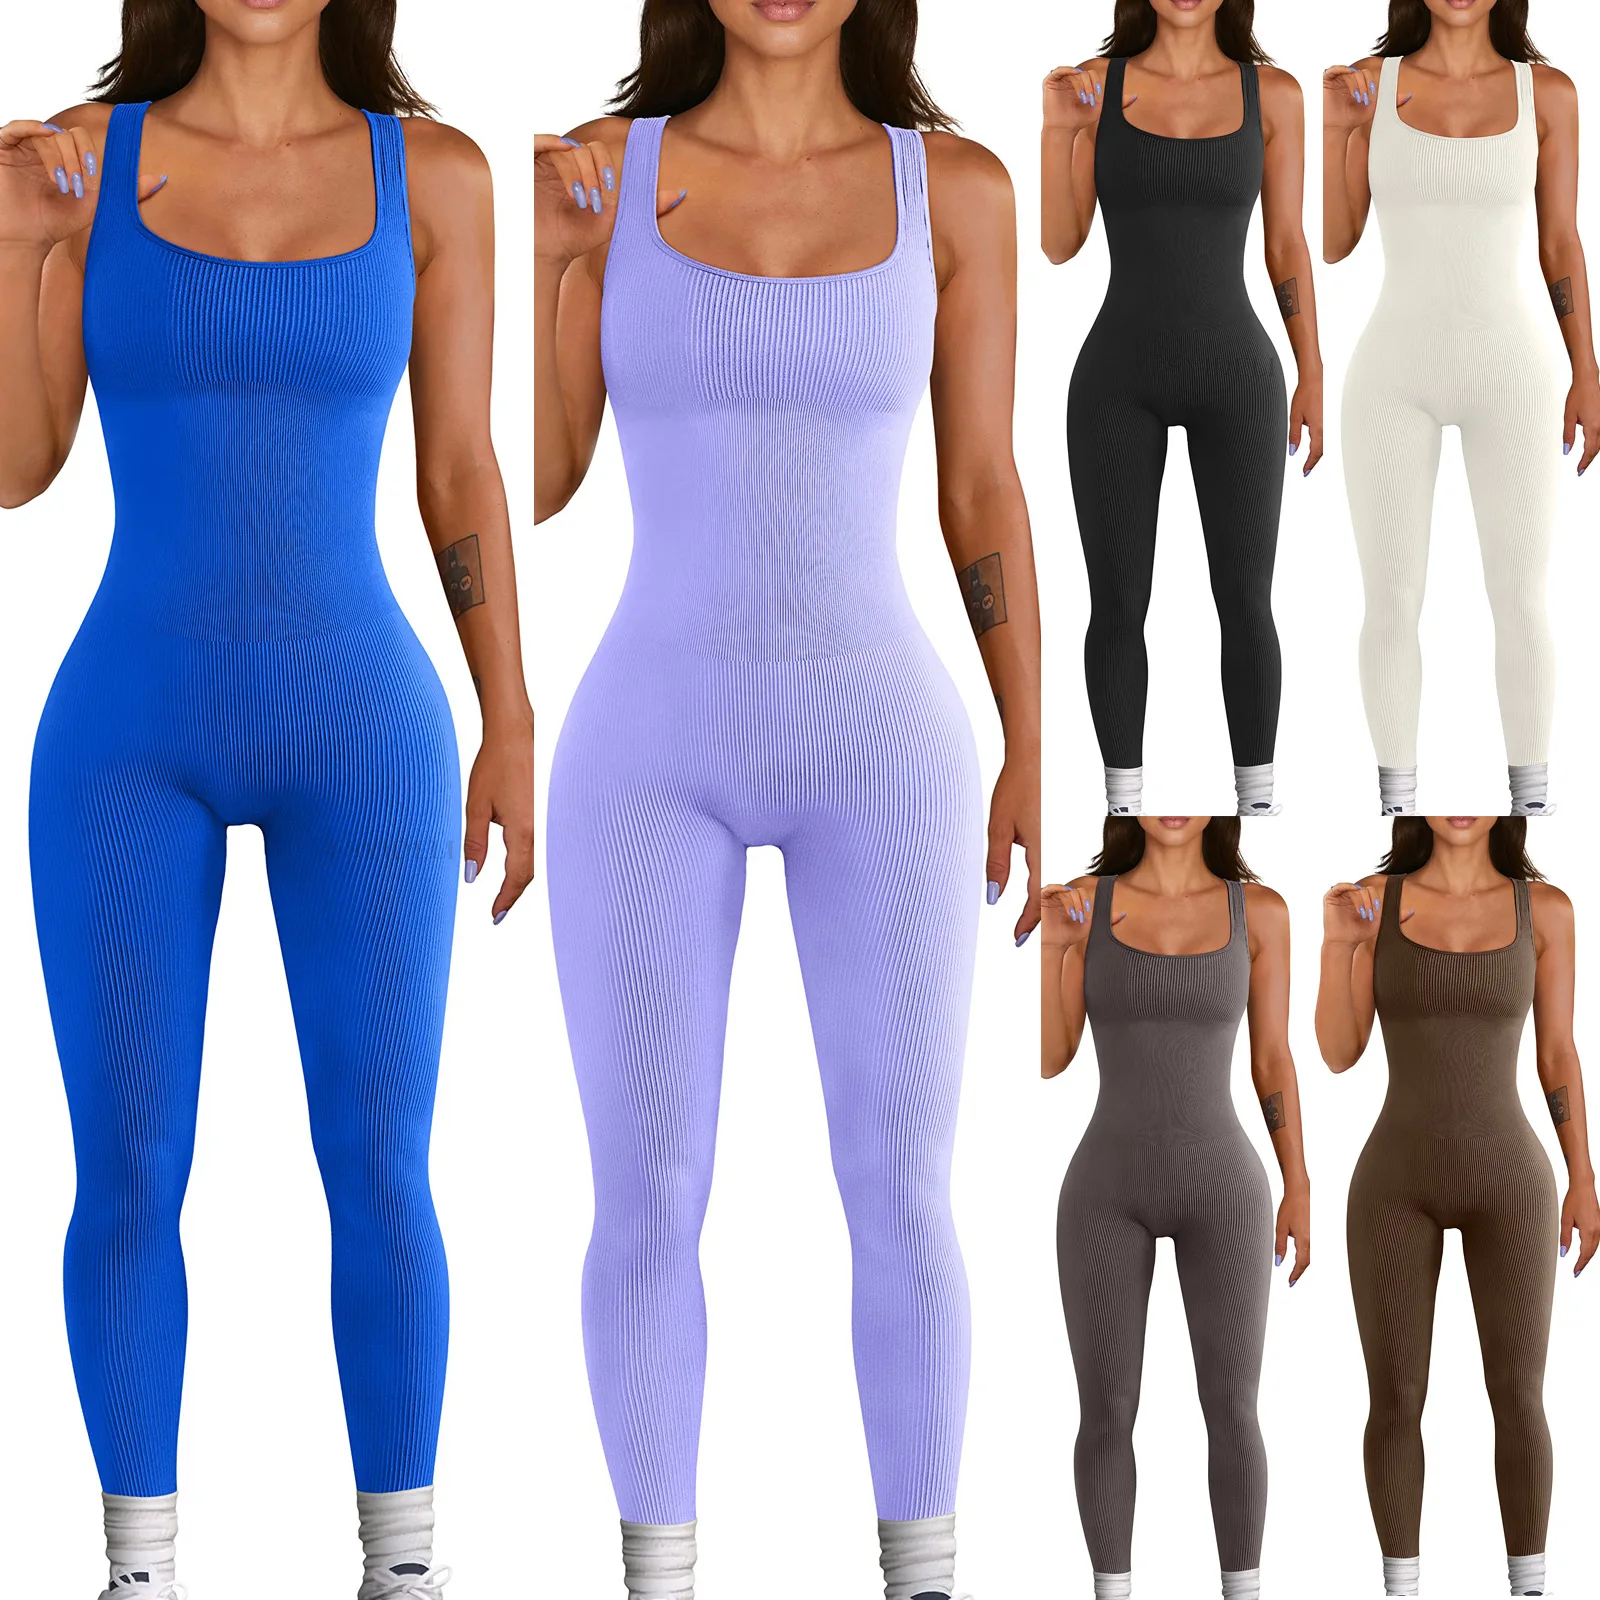 Women's Yoga Jumpsuits Ribbed One Piece Tank Tops Rompers Sleeveless Exercise Jumpsuits Female Shapers